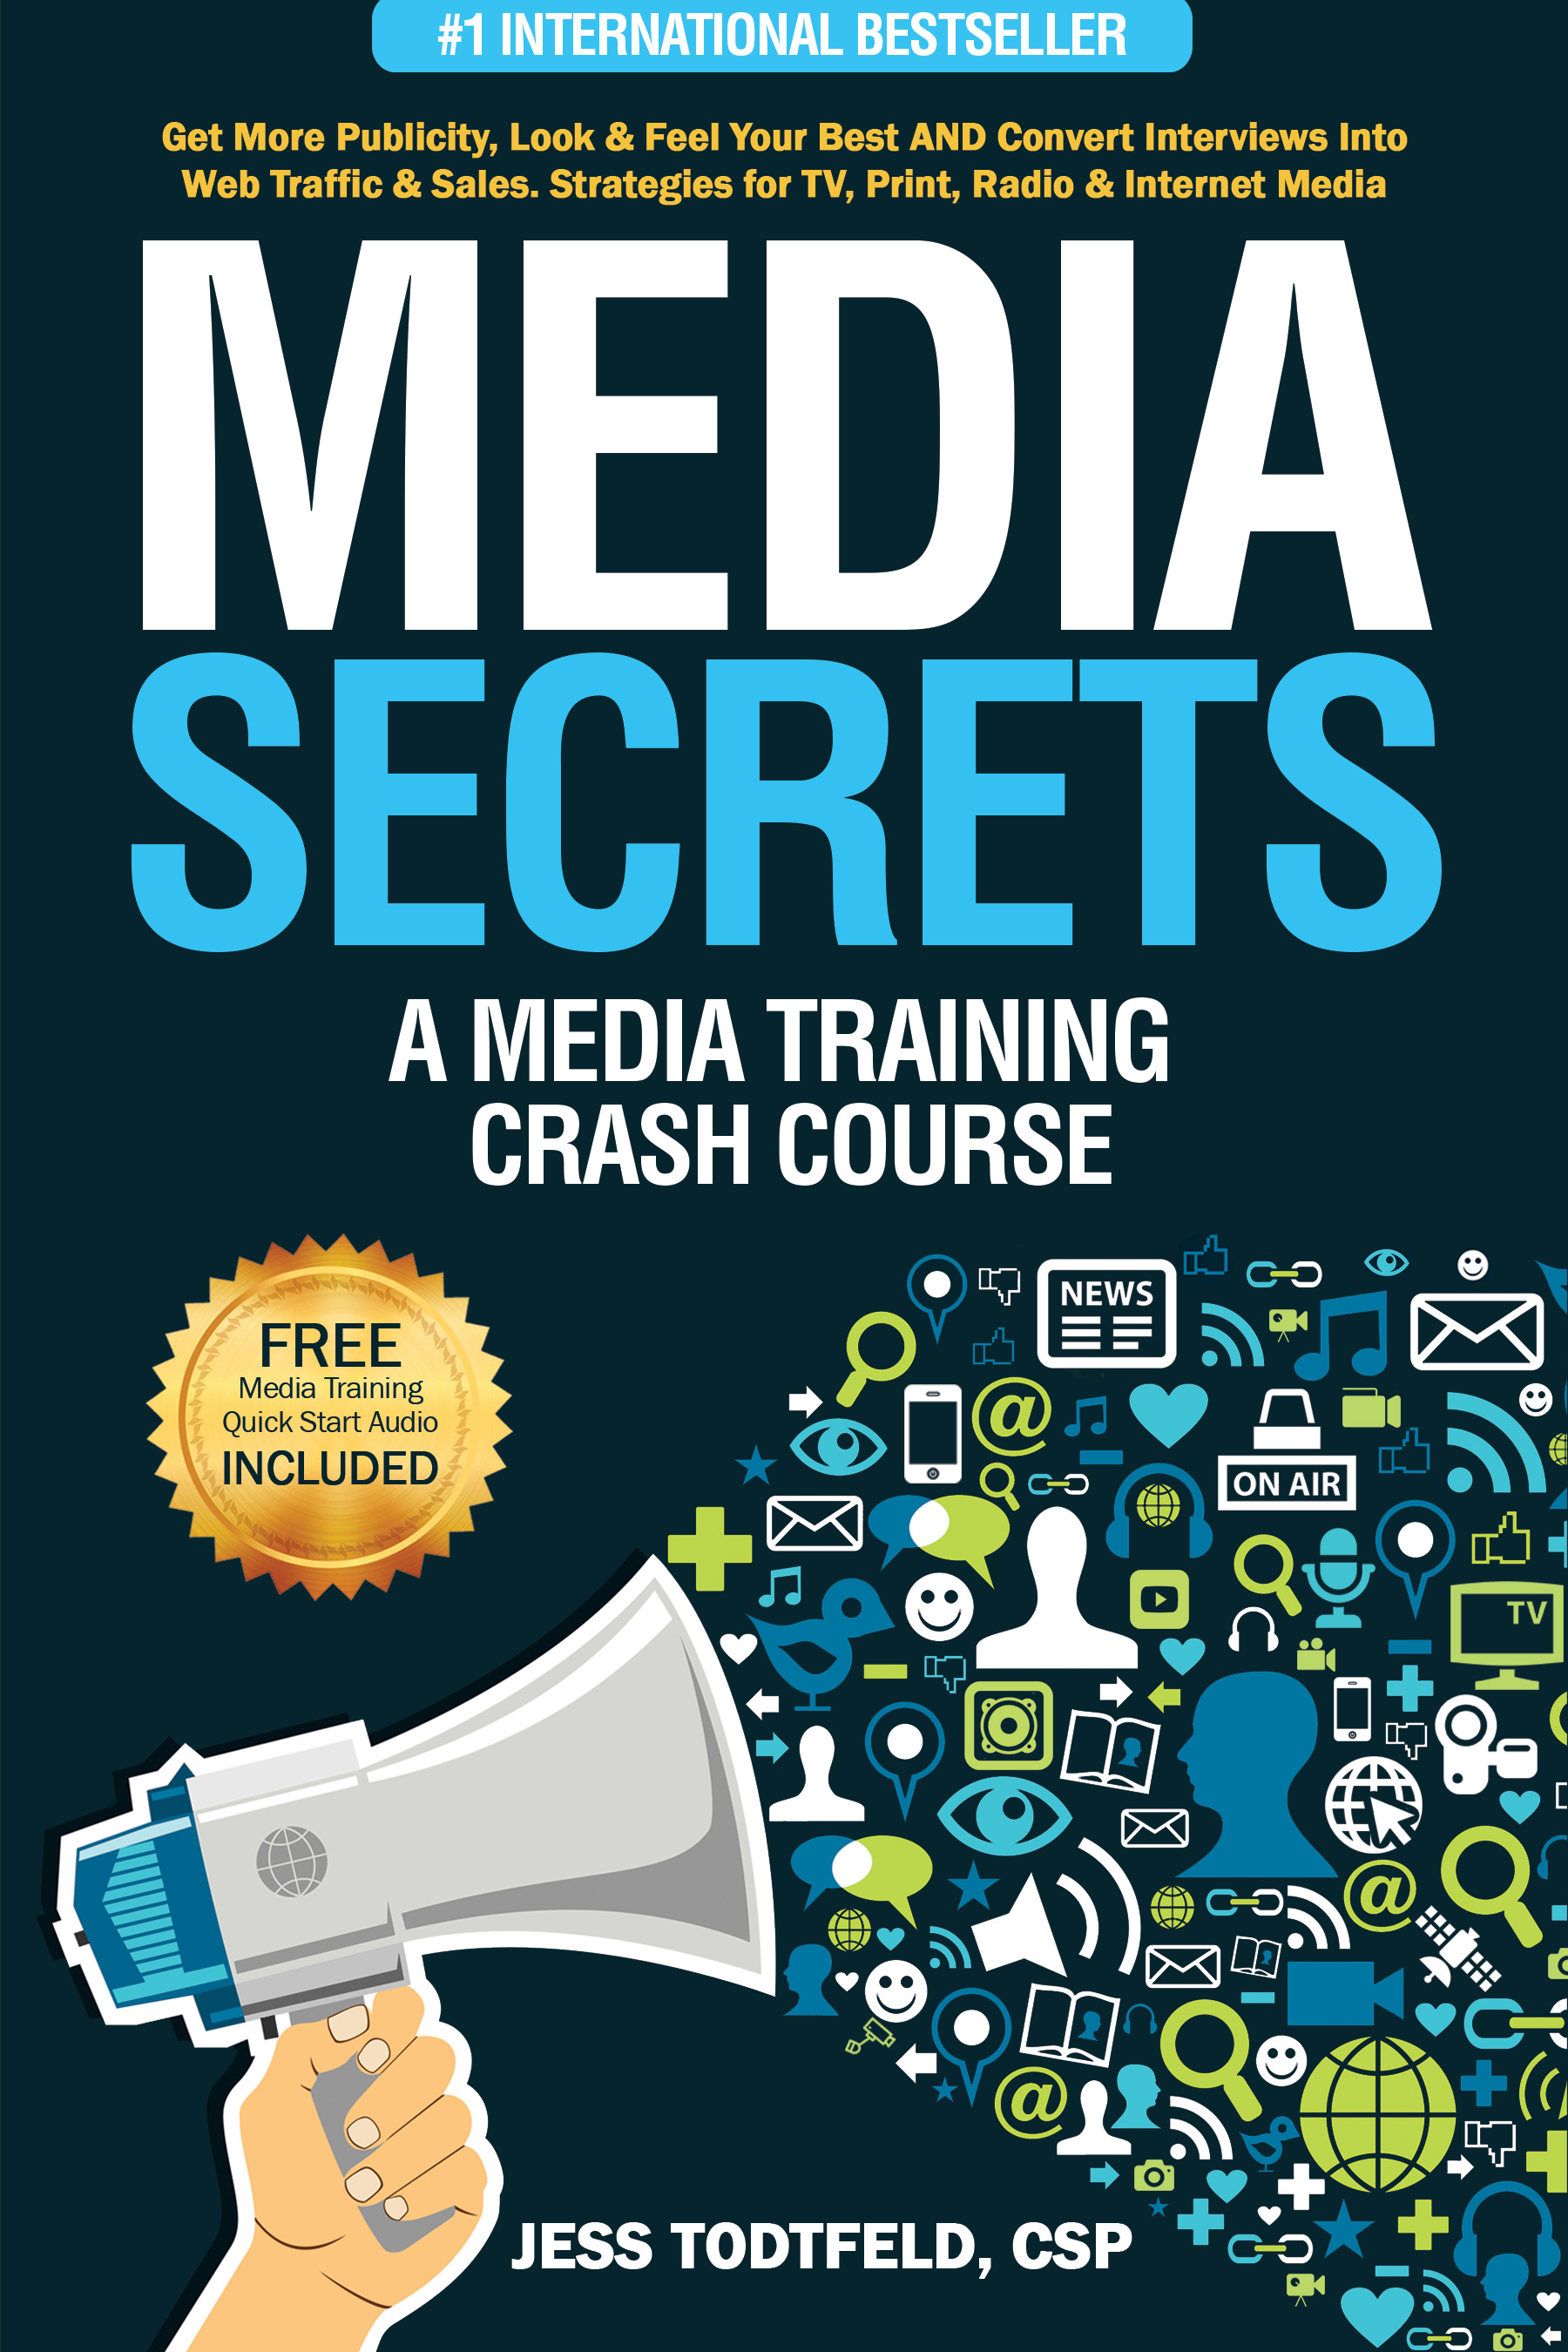 Media Training Is Not Just About a Reporter Interviewing You . . . It’s So Much More